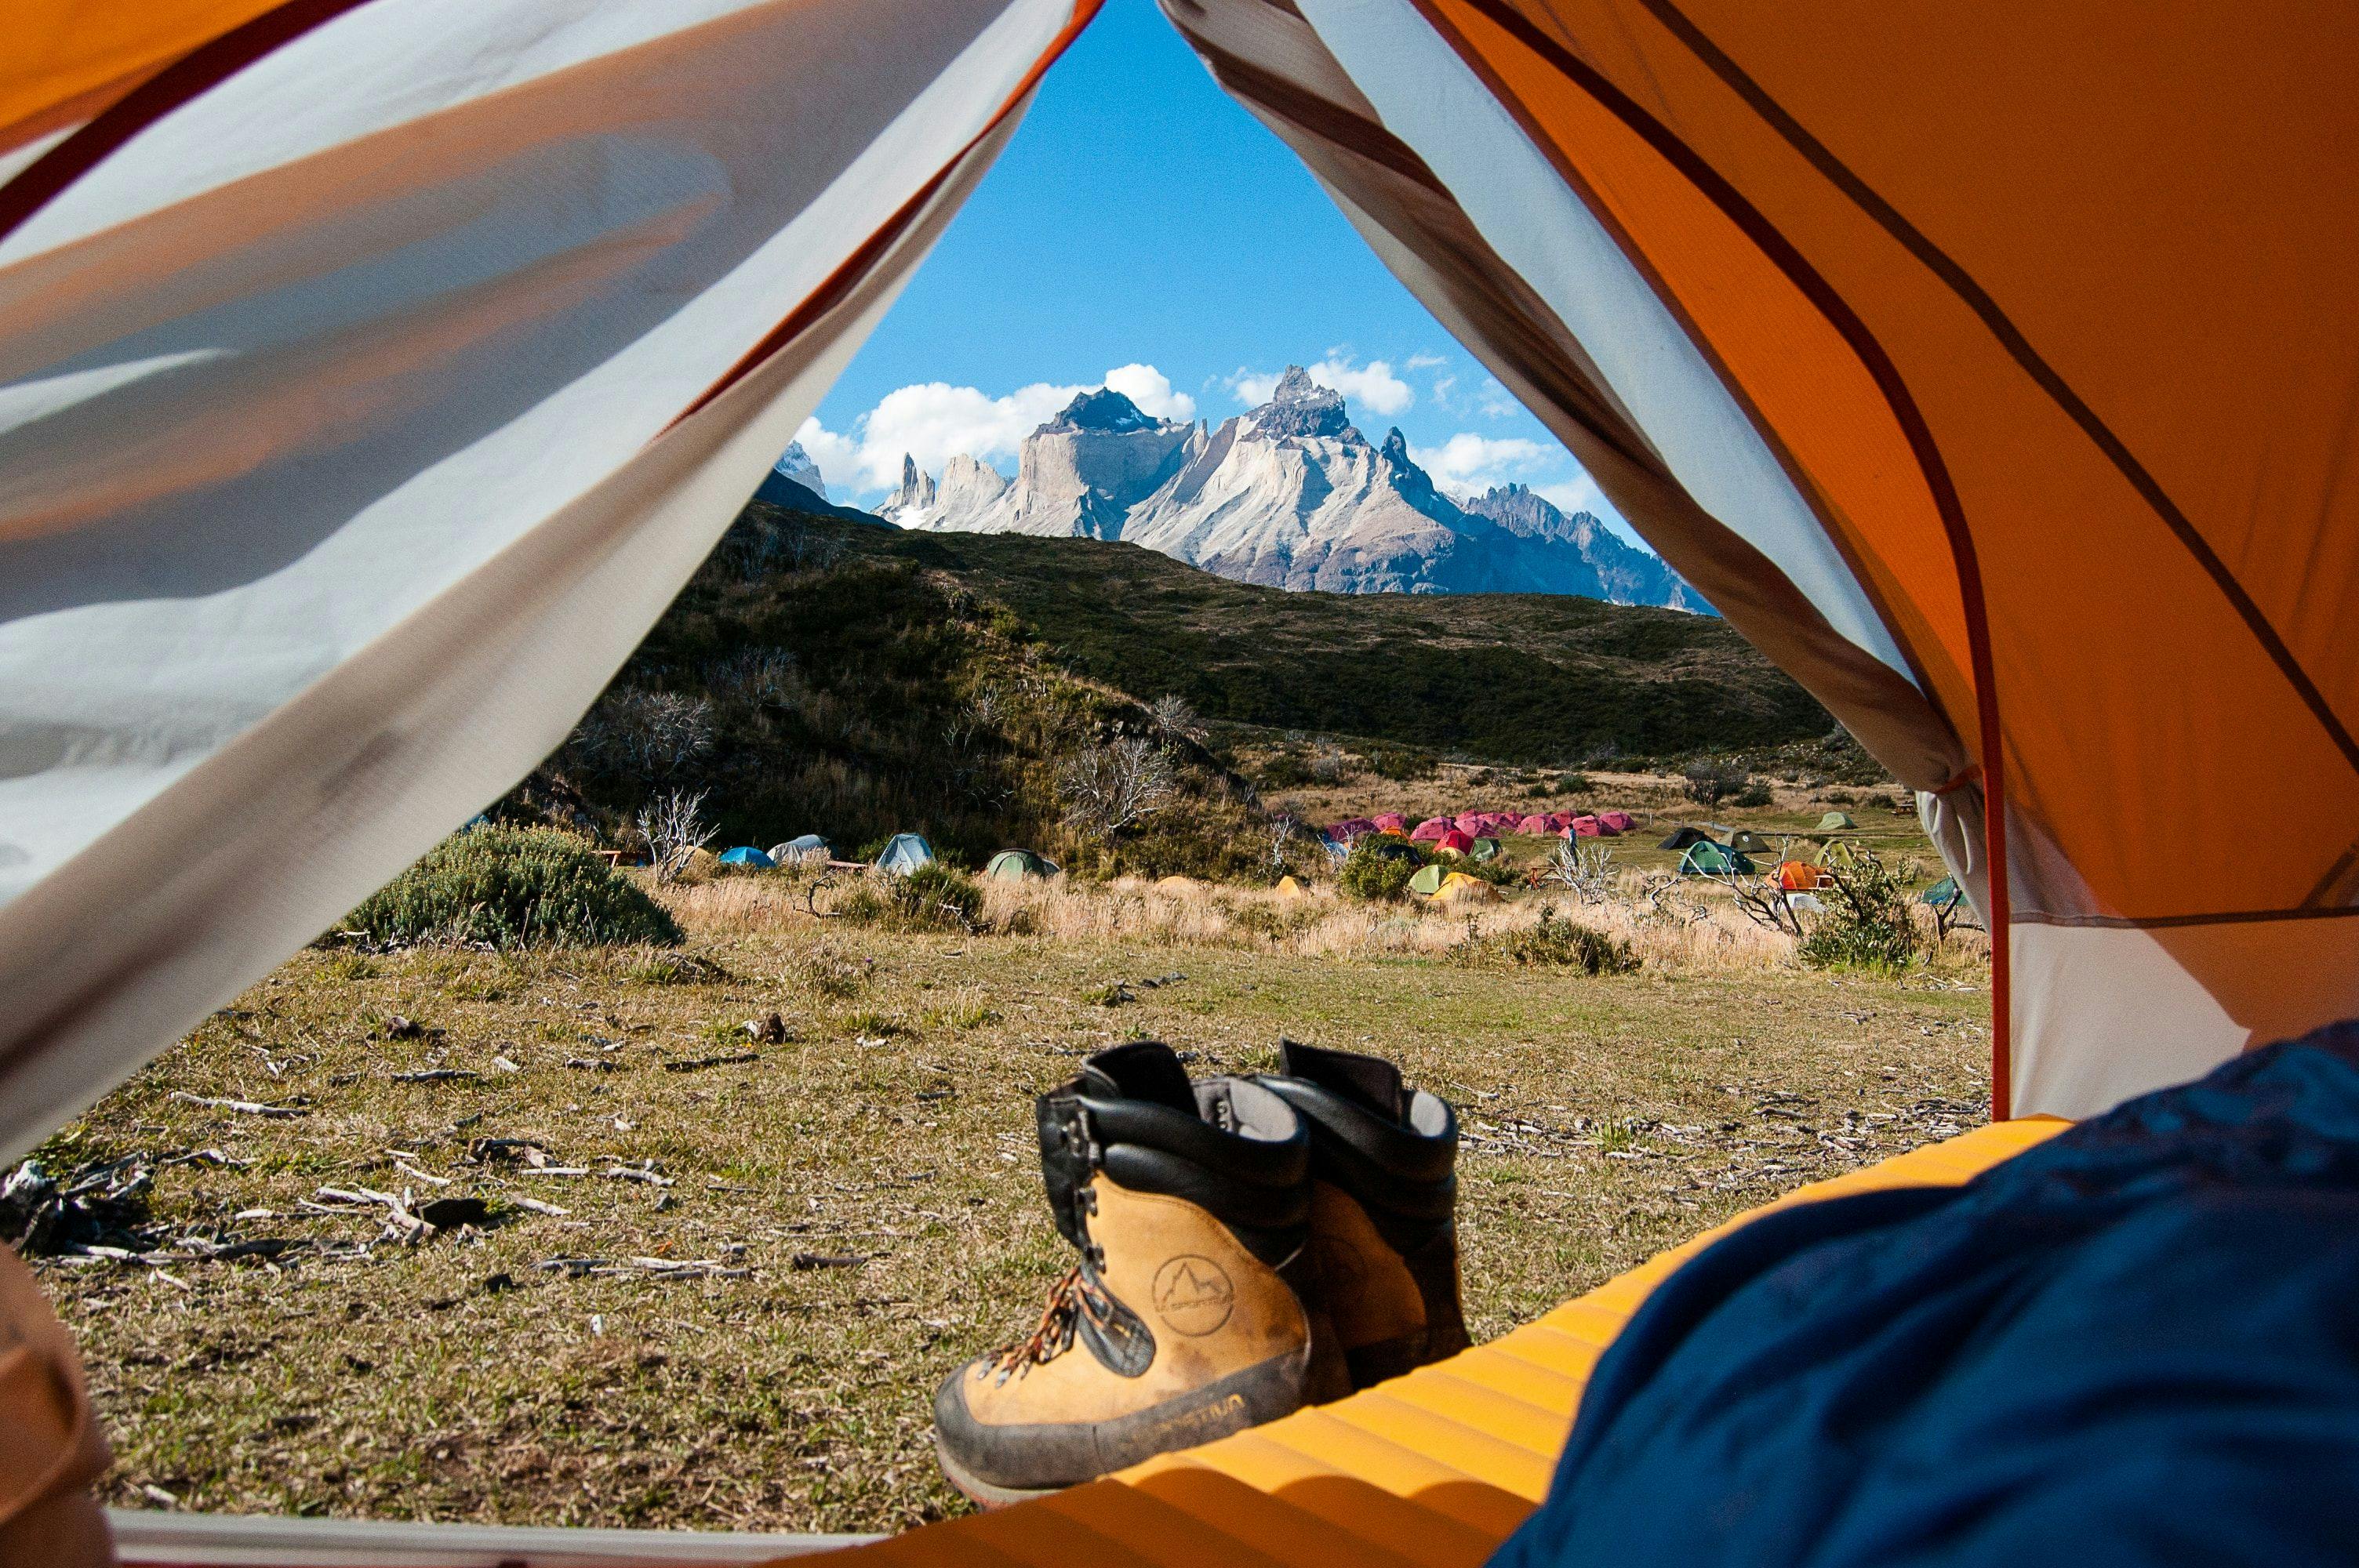 Camping in Torres Del Paine national park in Chile